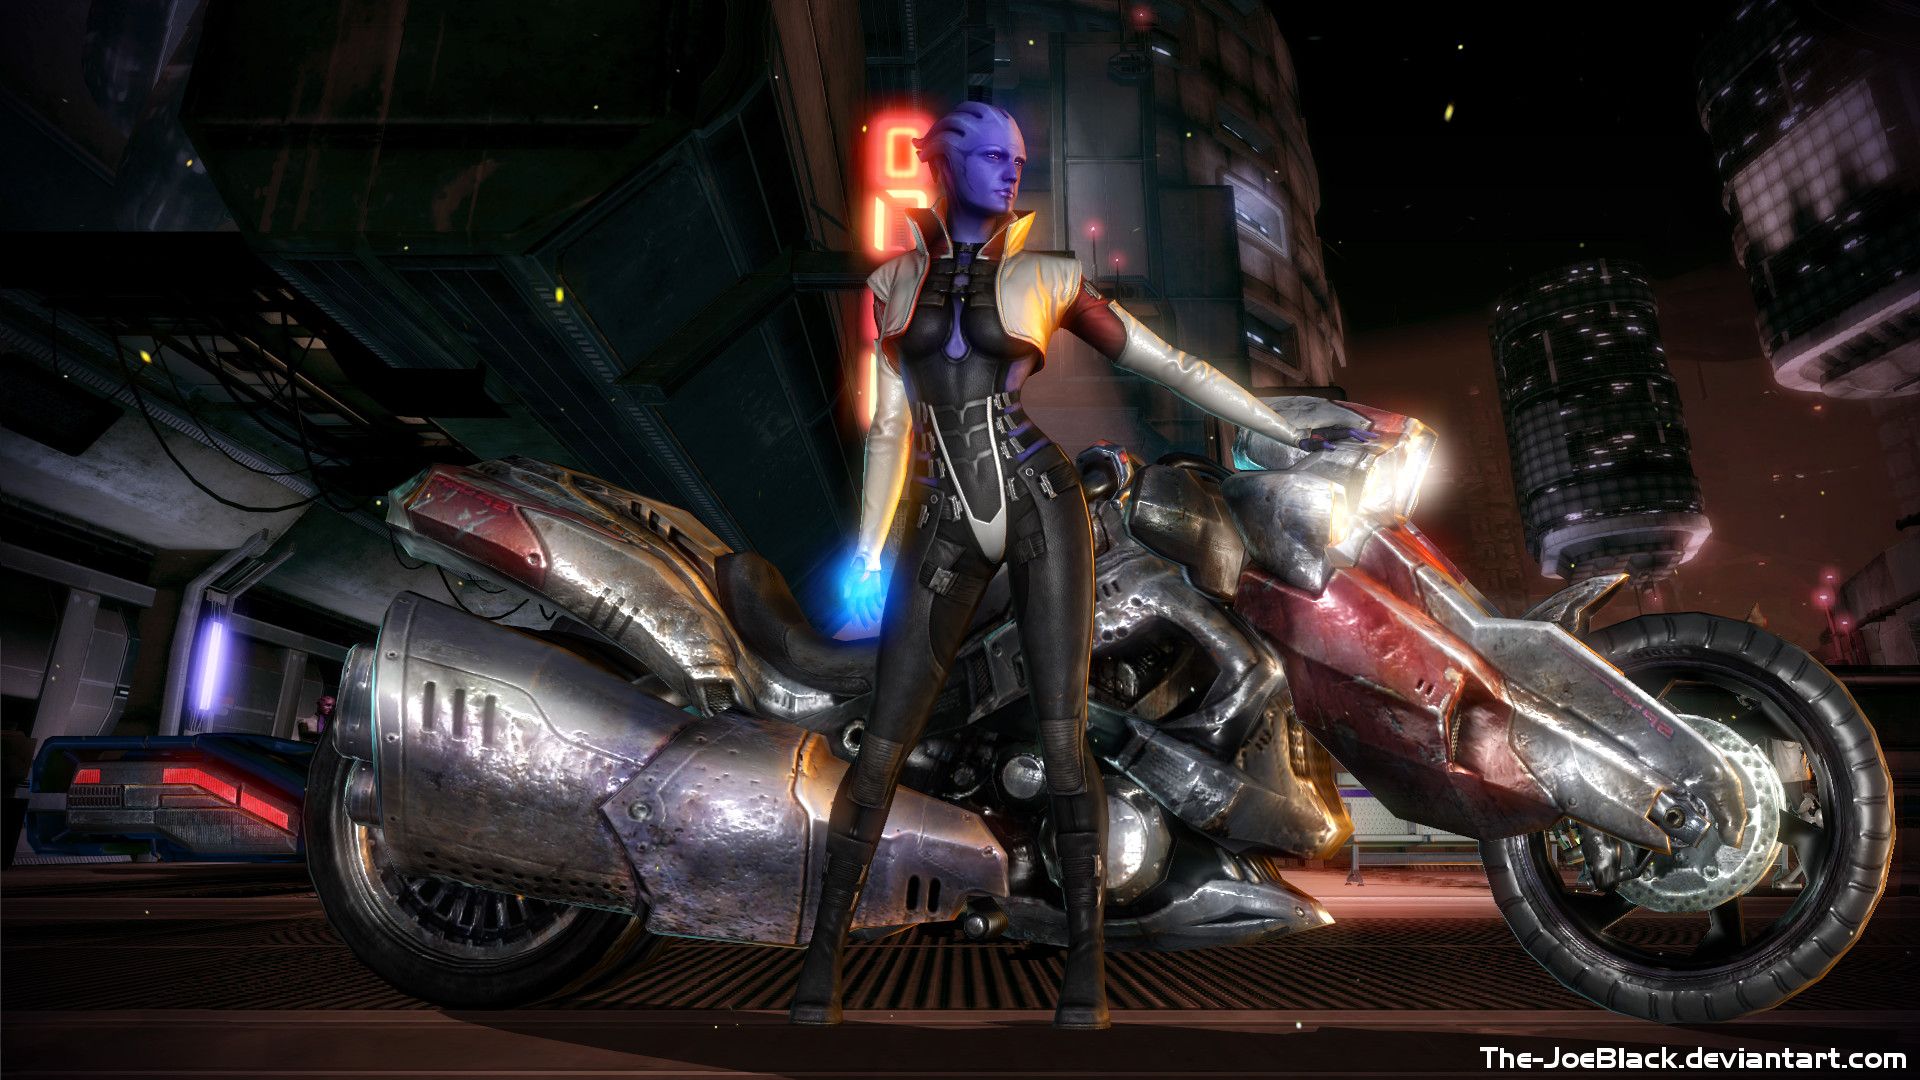 mass_effect___aria_on_omega_by_the_joeblack-d7s6y4a.jpg